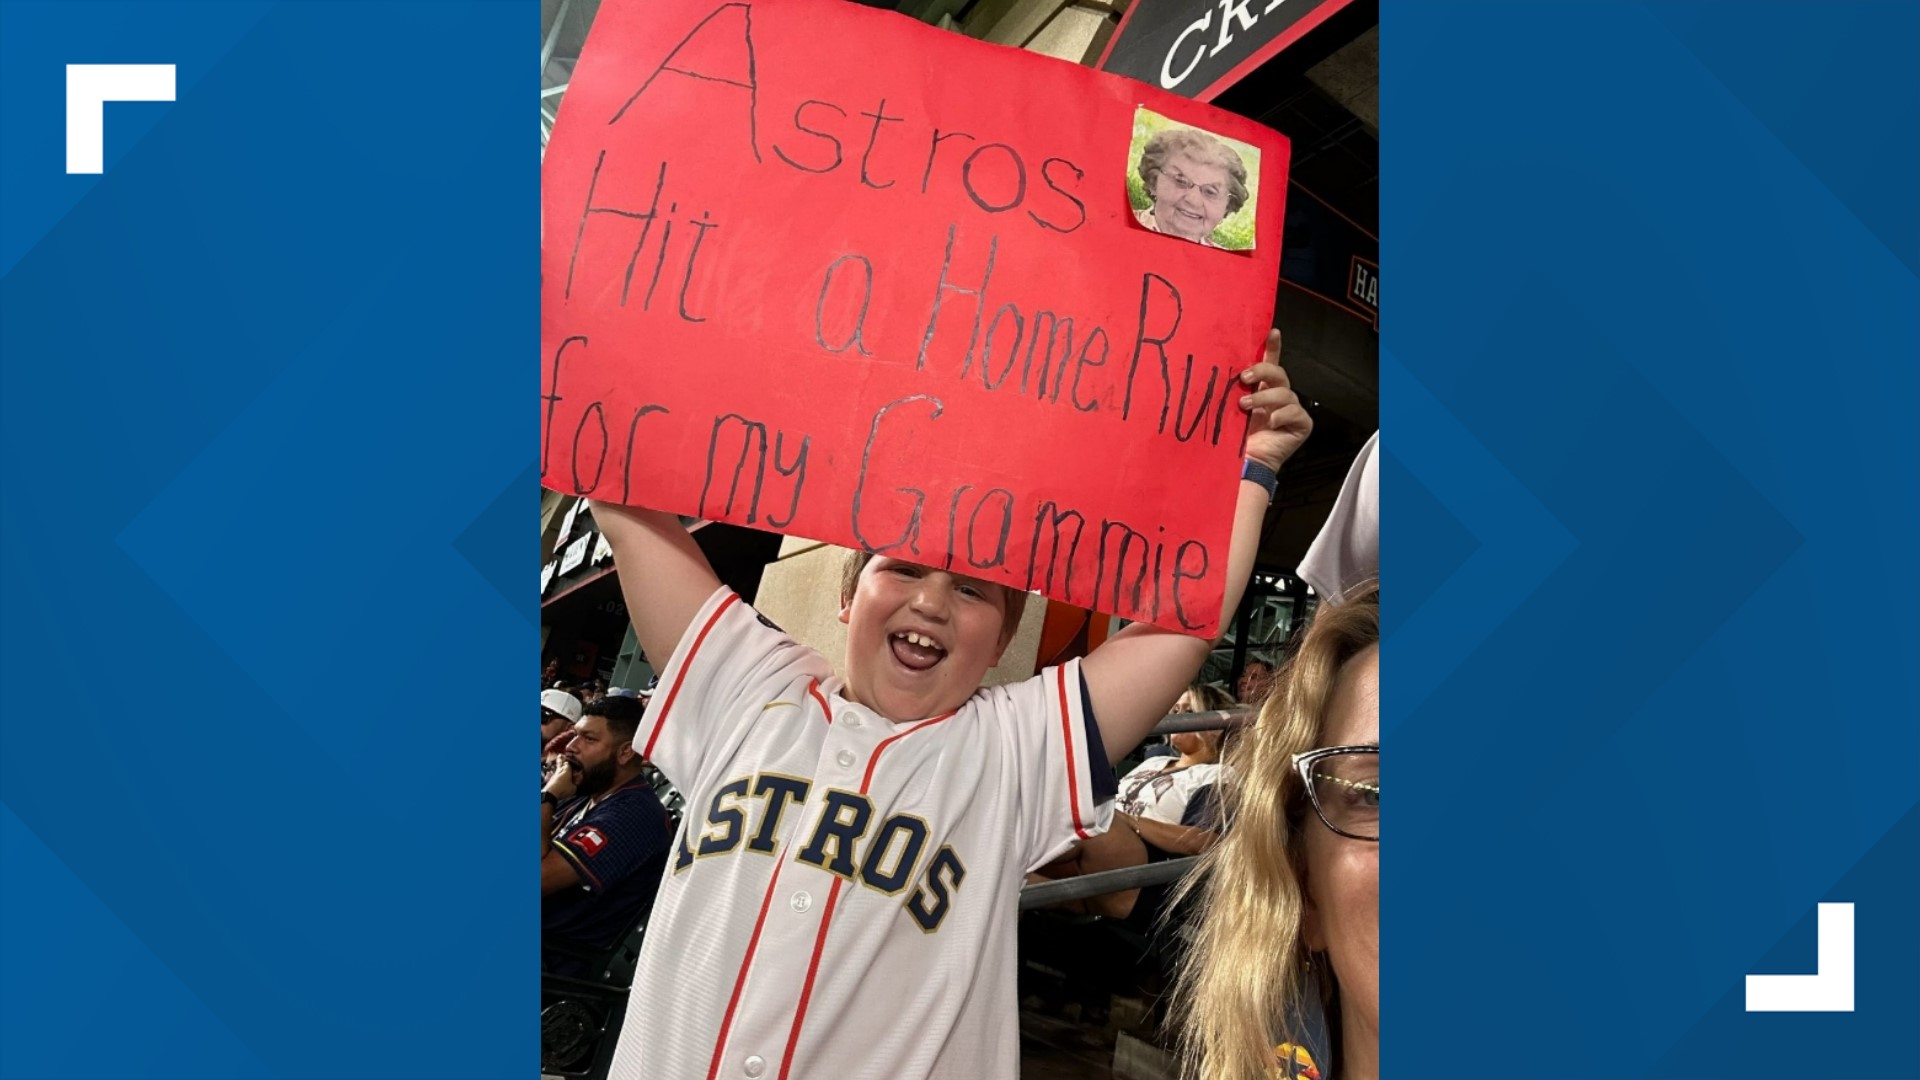 “Hit a home run for my Grammie!” Astros star Jose Altuve came through in a big way for the young fan during Monday’s game at Minute Maid Park.